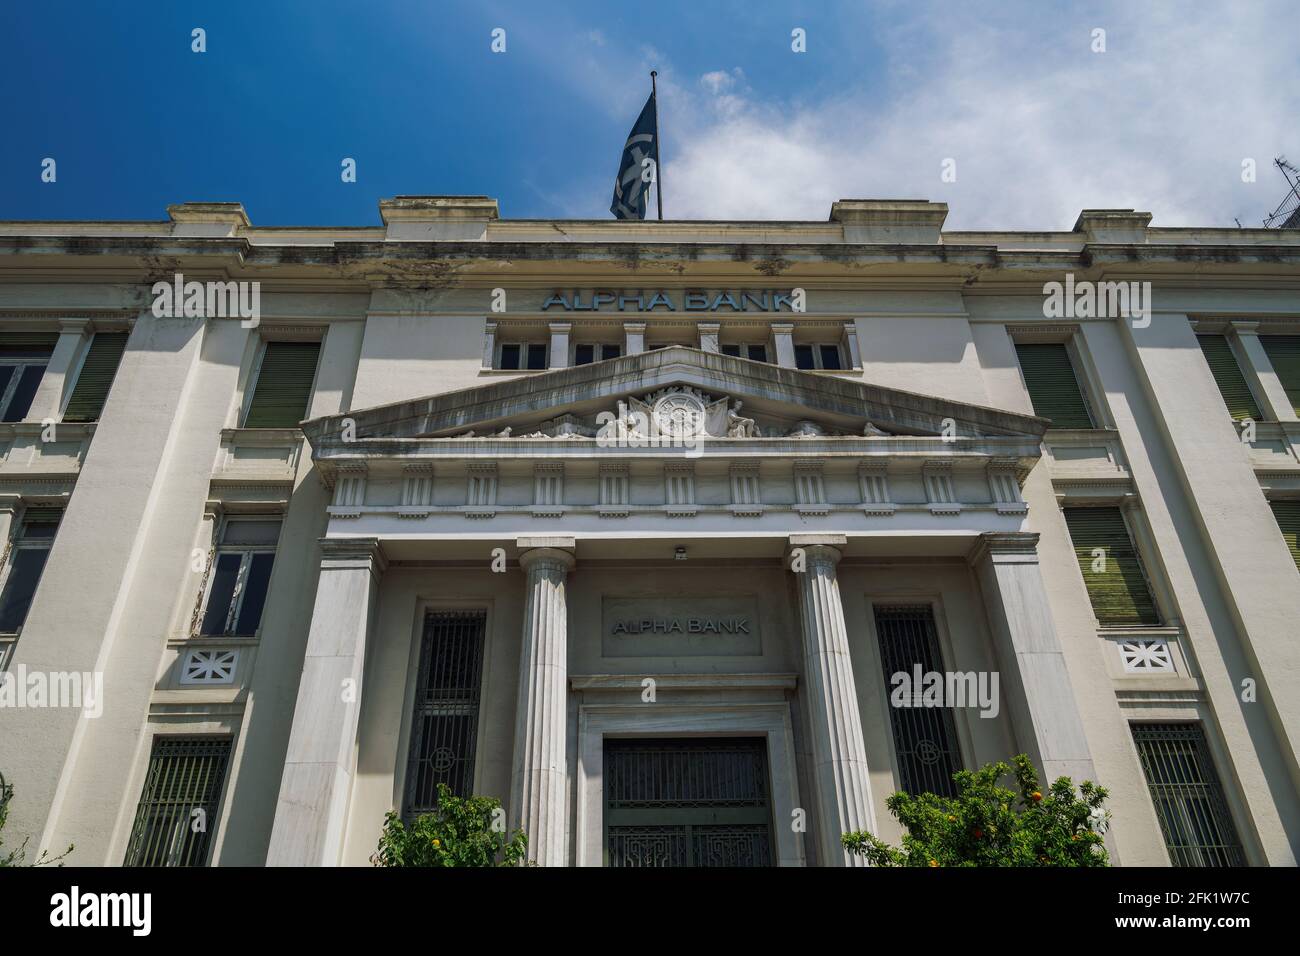 Alpha Bank Greece High Resolution Stock Photography and Images - Alamy